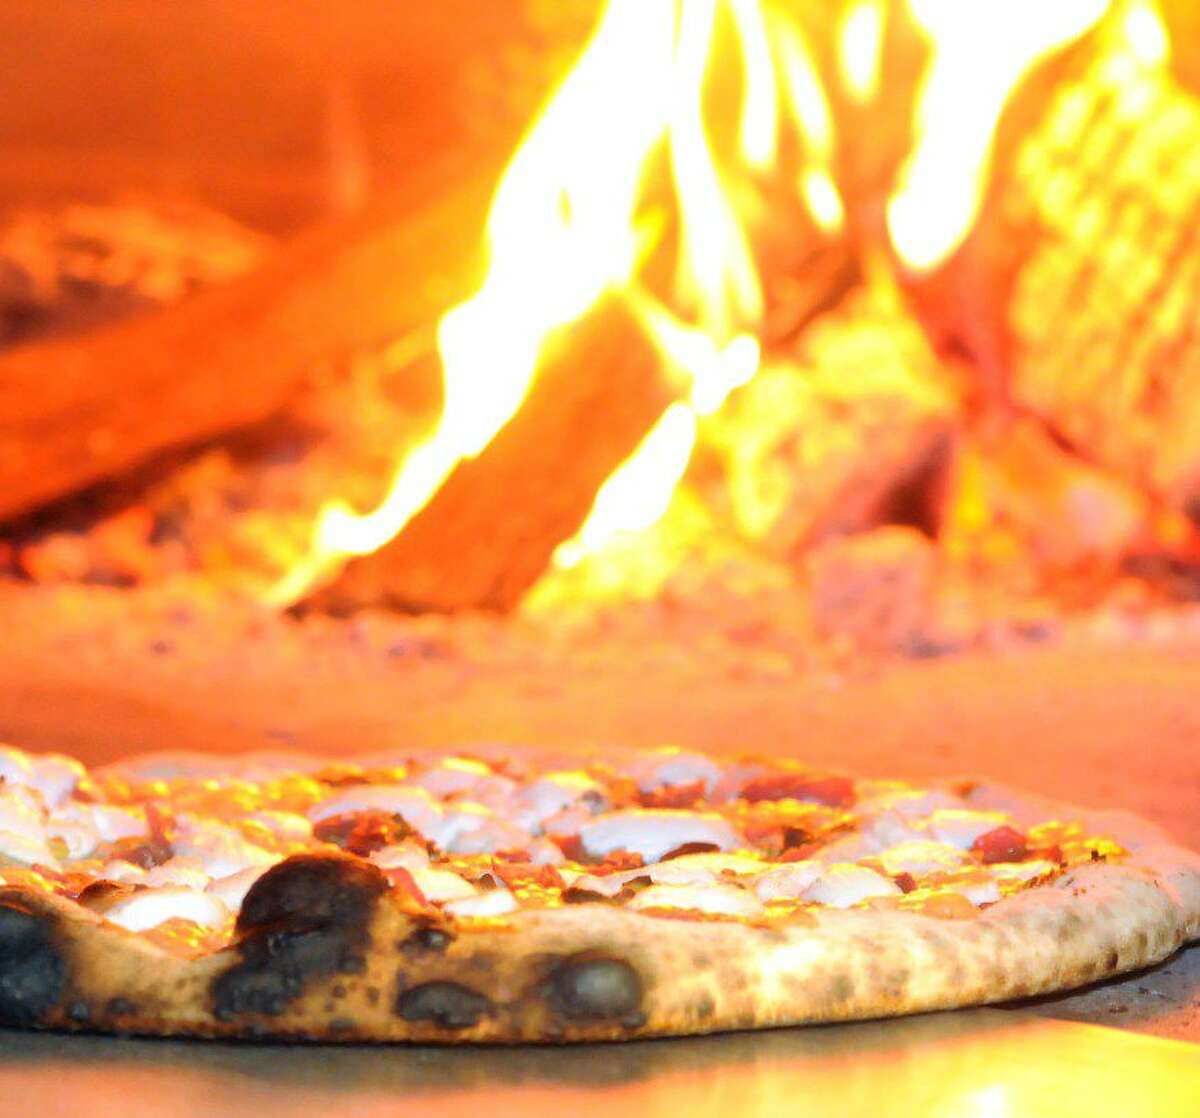 Pizzas take 90 seconds to cook in Da Legna’s wood-fired oven.